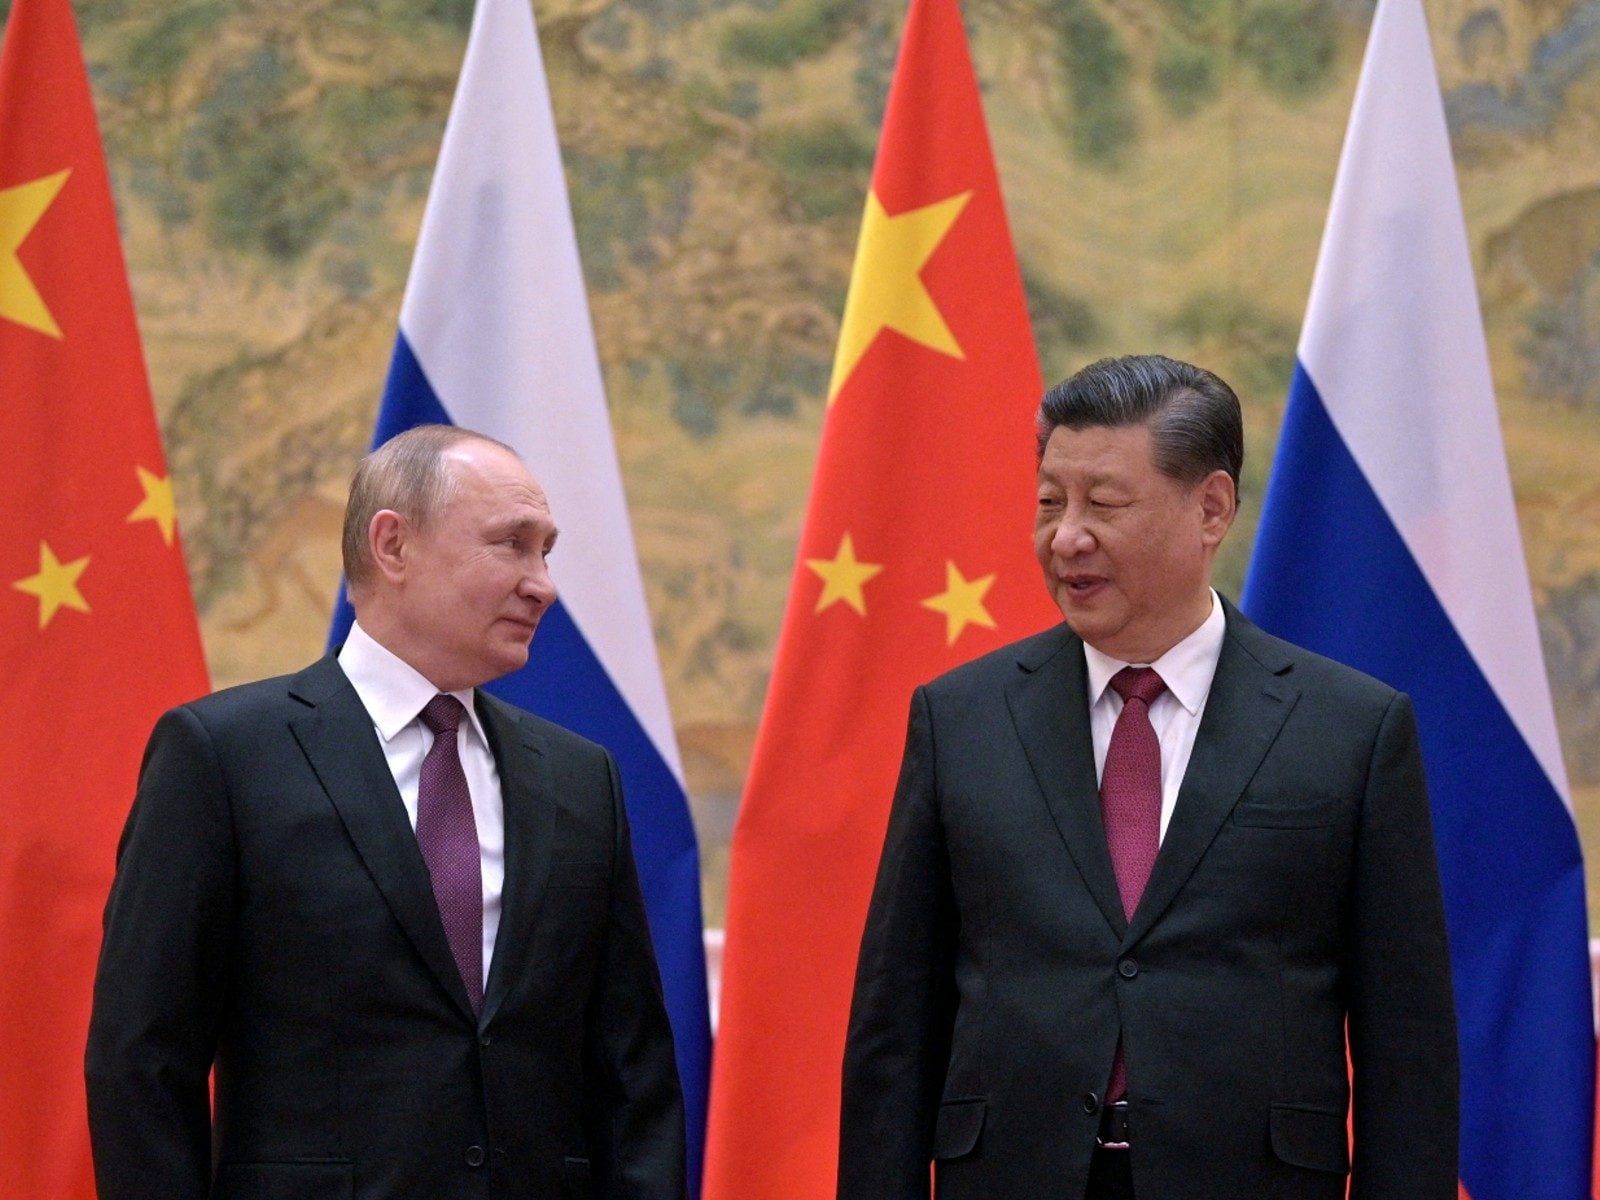 Russian Pres Putin congratulates Chinese counterpart Xi on new term, hails ‘strengthening’ ties